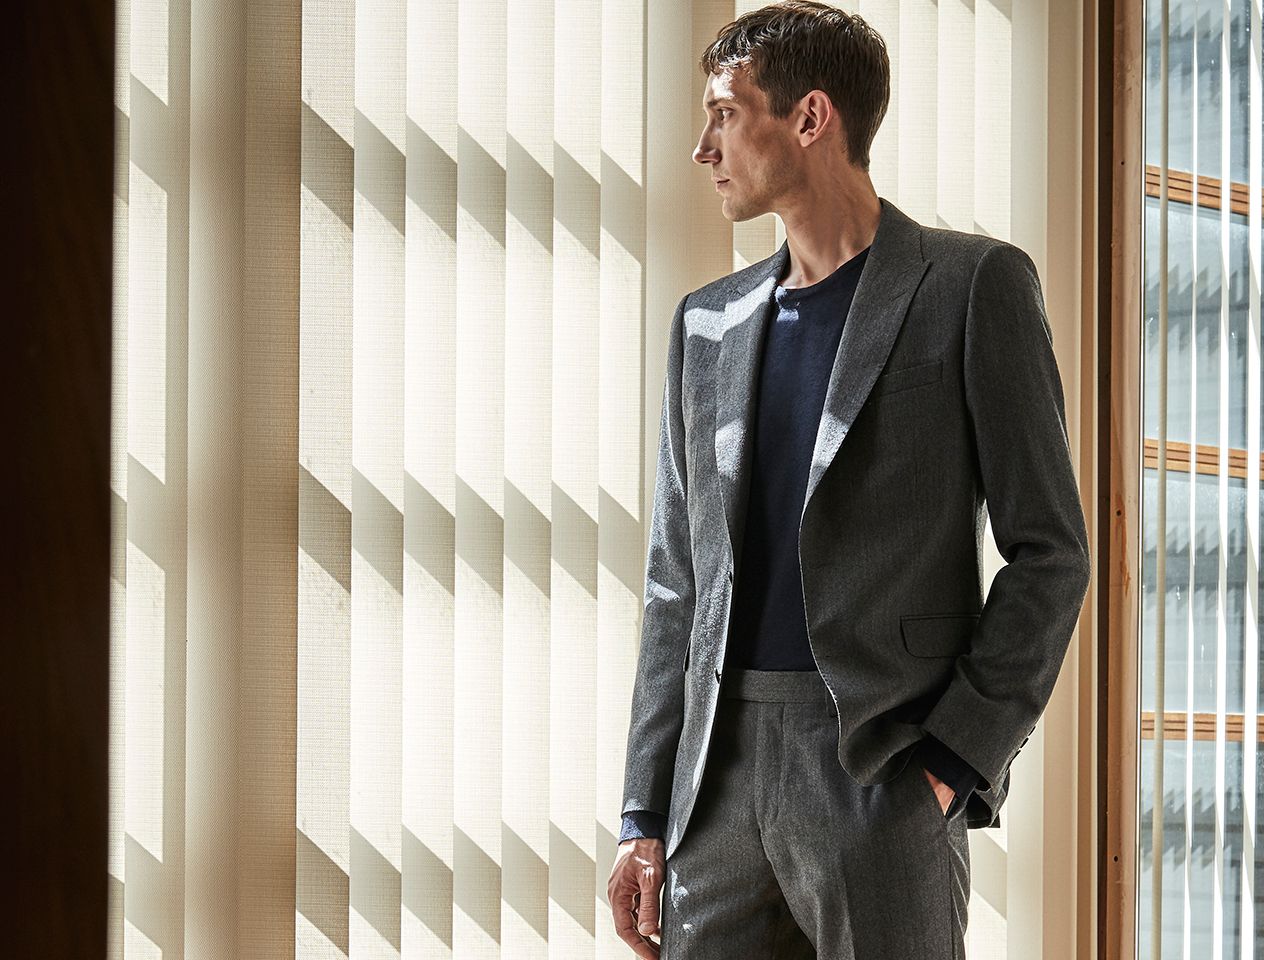 A model wearing a suit - one of the key pieces that make up a men's capsule wardrobe